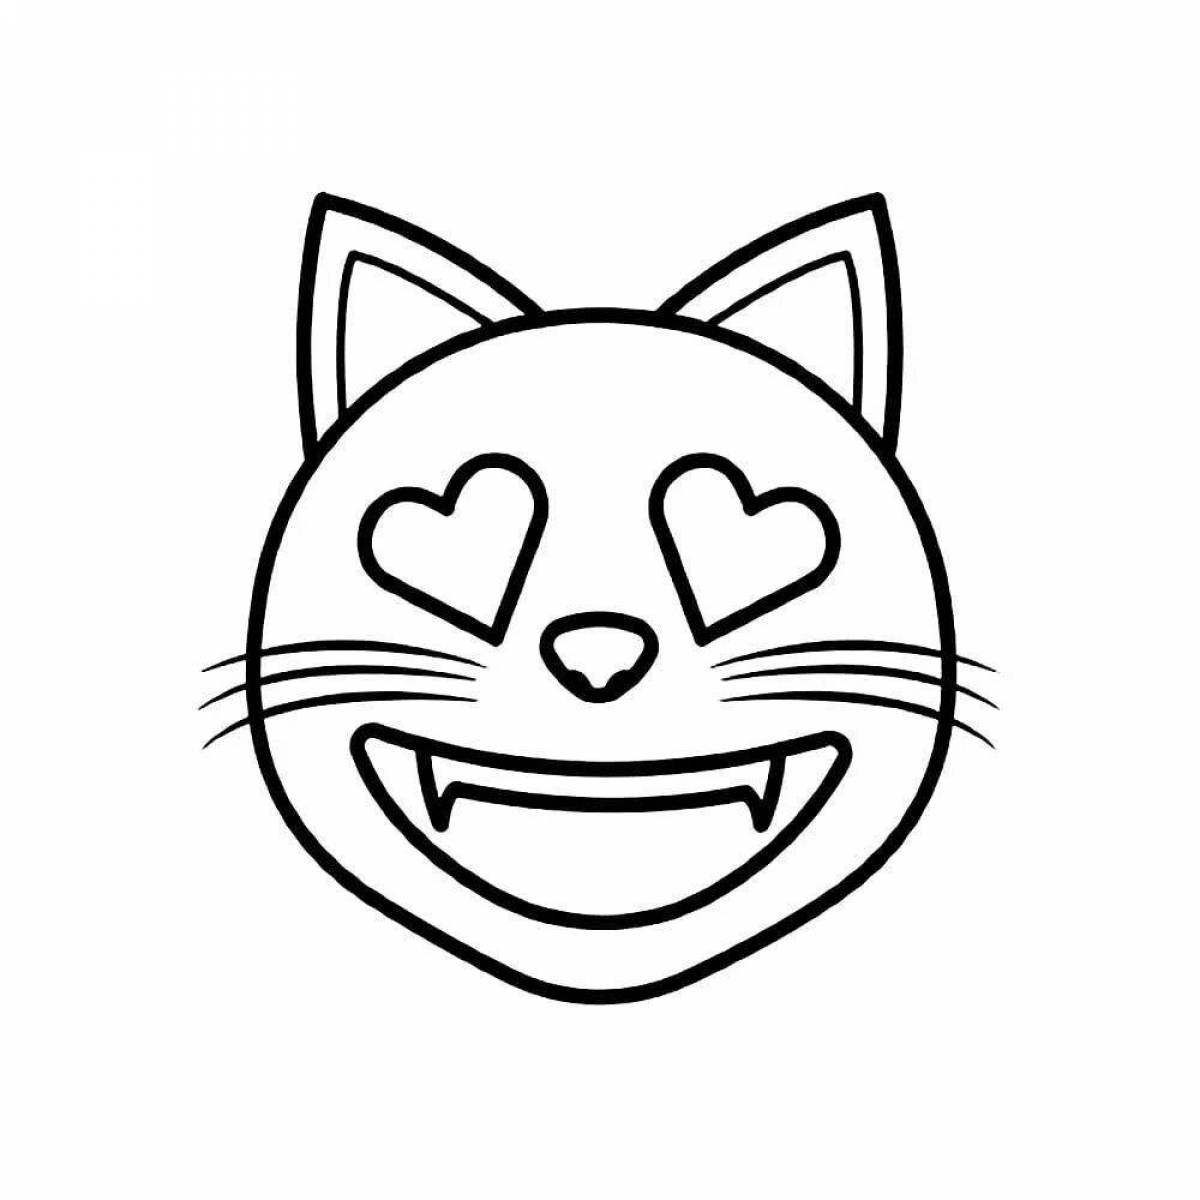 Coloring page adorable cat face